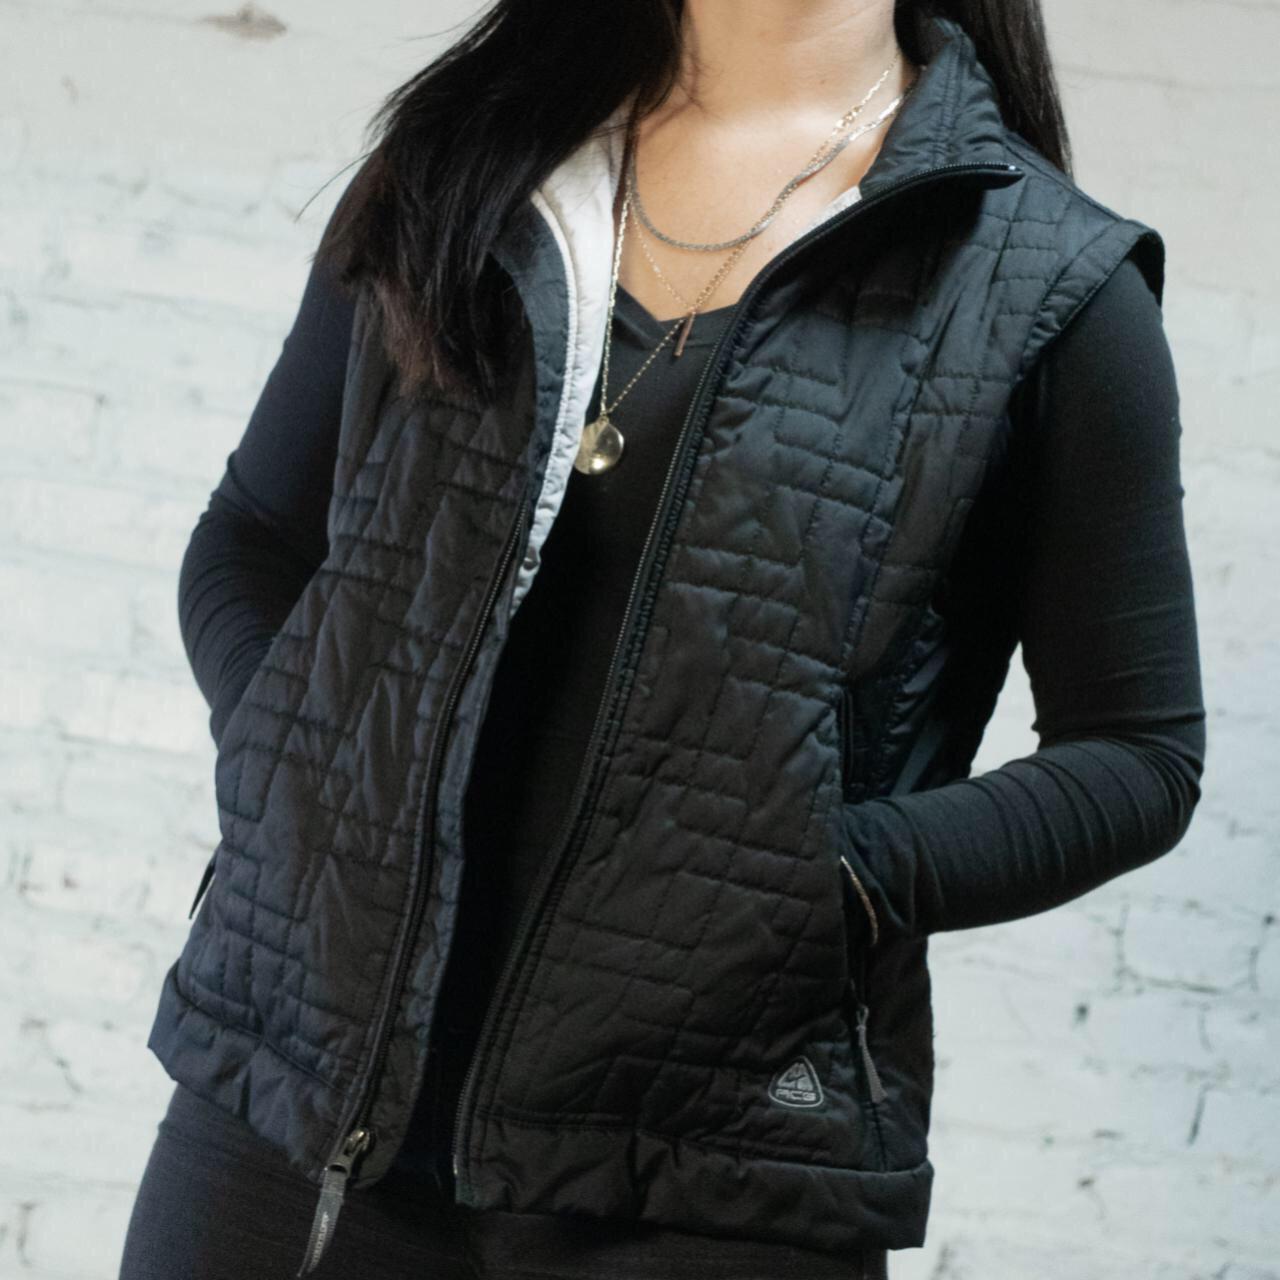 Product Image 4 - Black Nike ACG Quilted Vest

Black